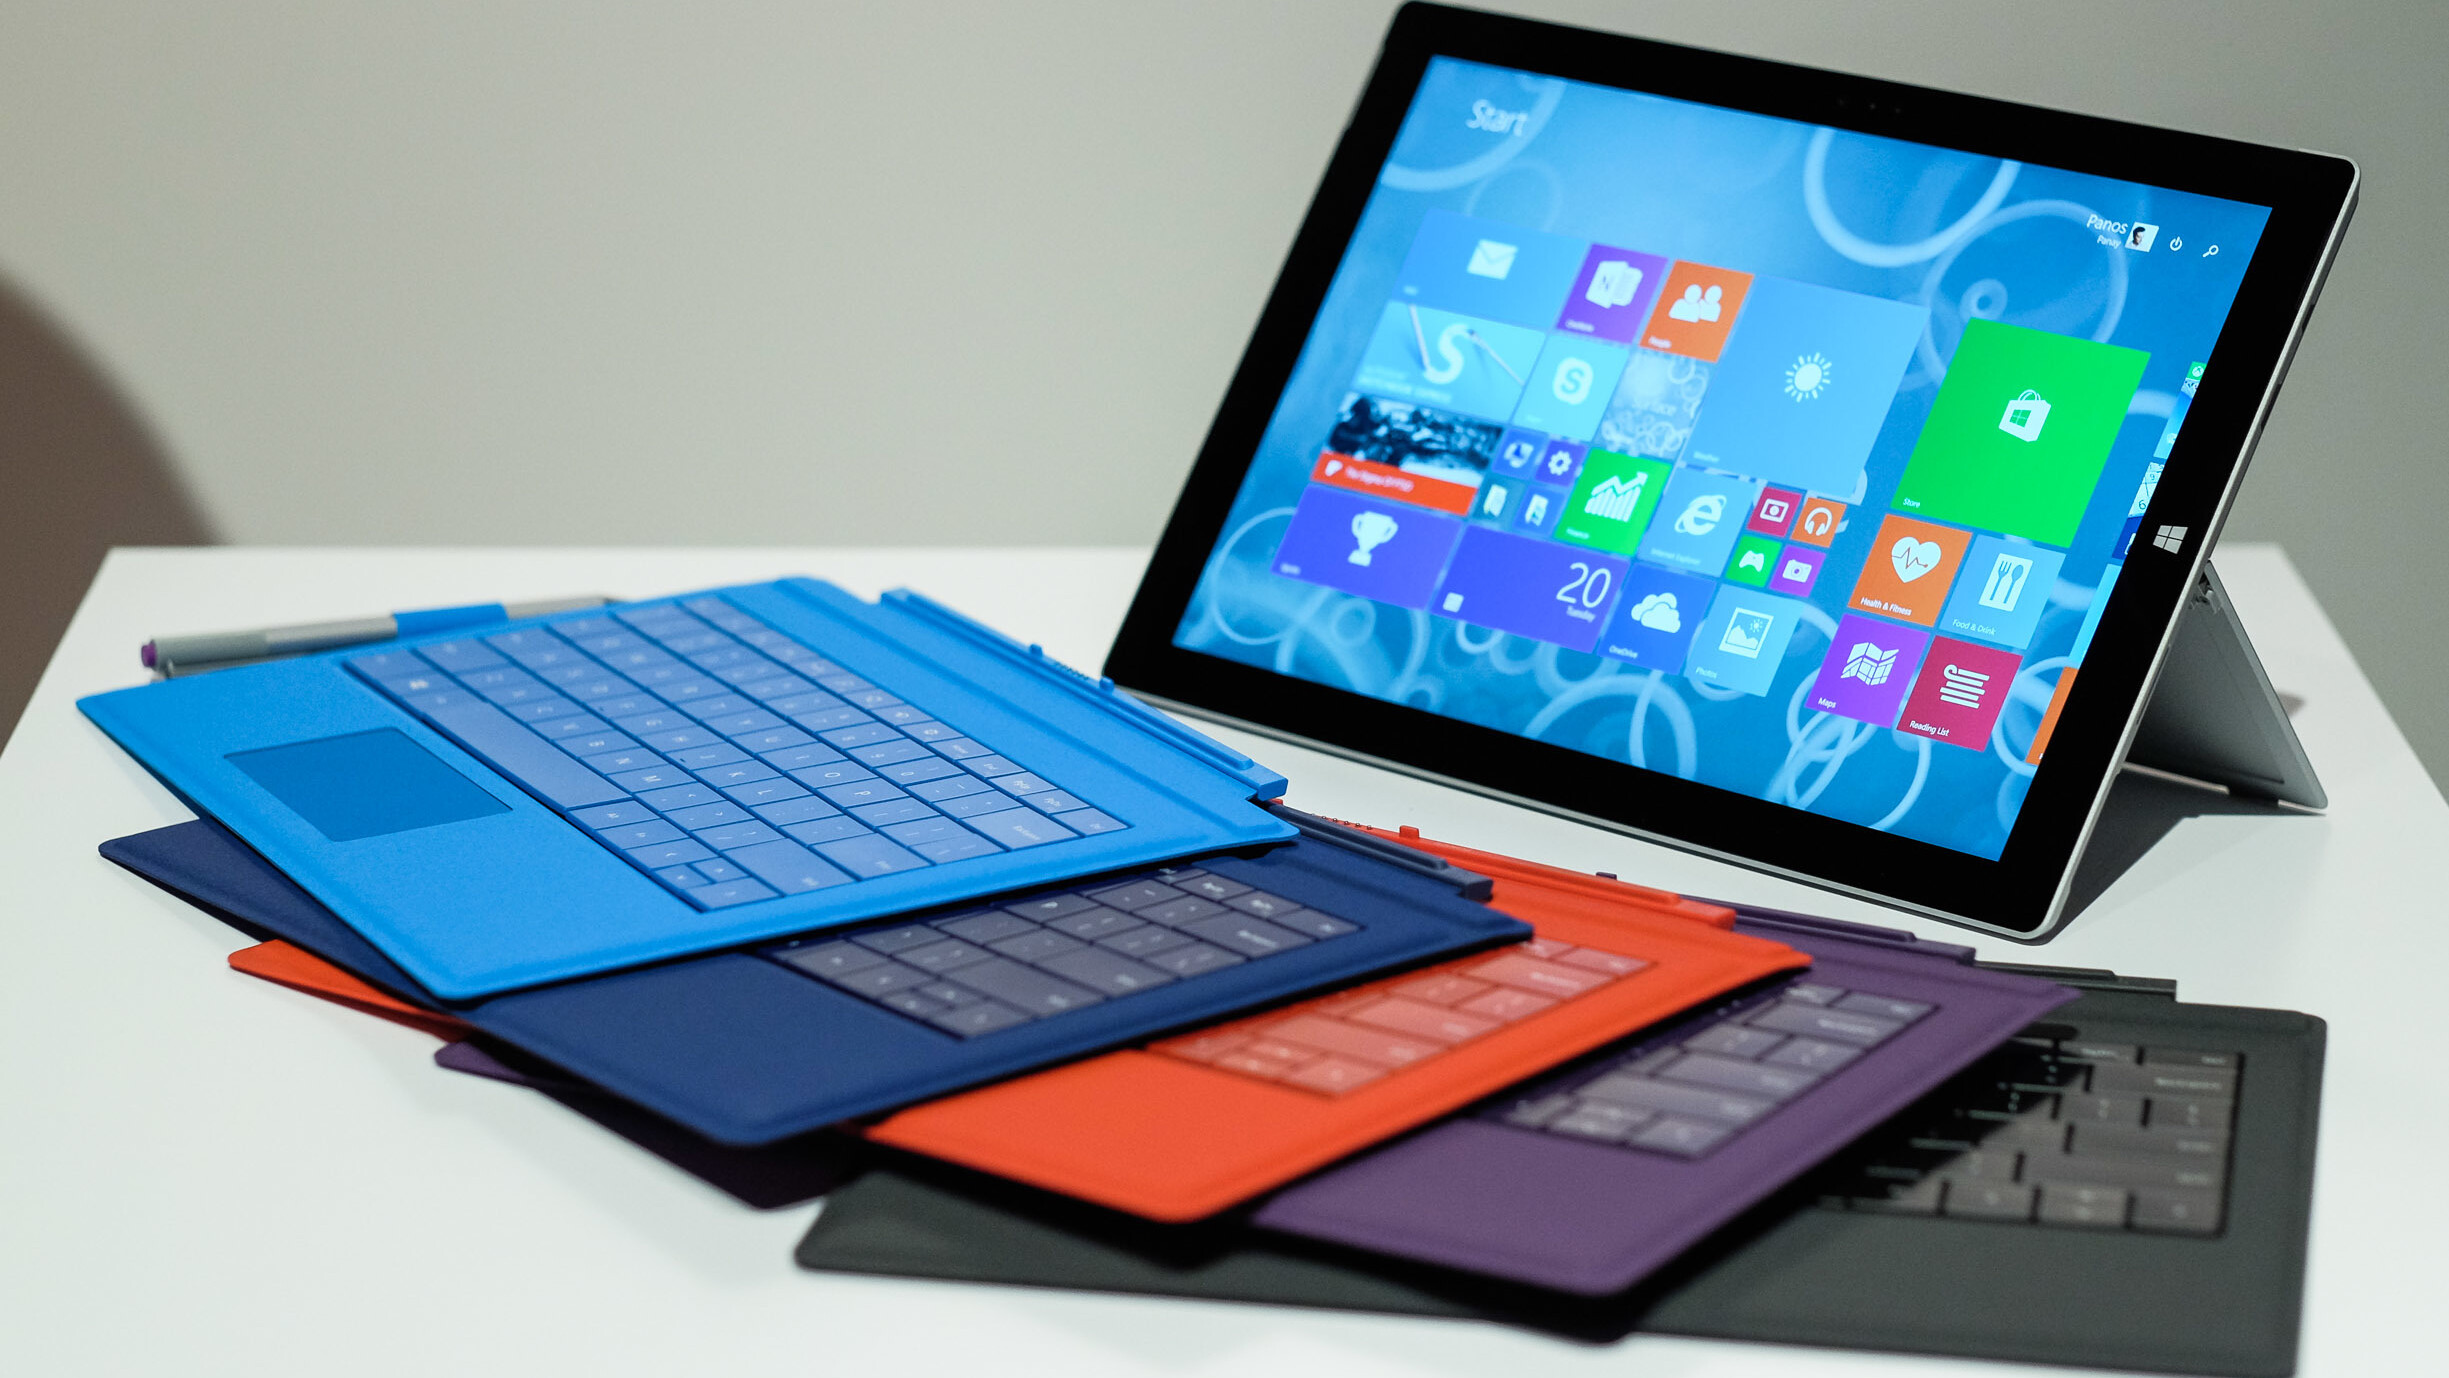 Microsoft rolls out August firmware updates for Surface Pro 3, original Surface Pro and Surface RT